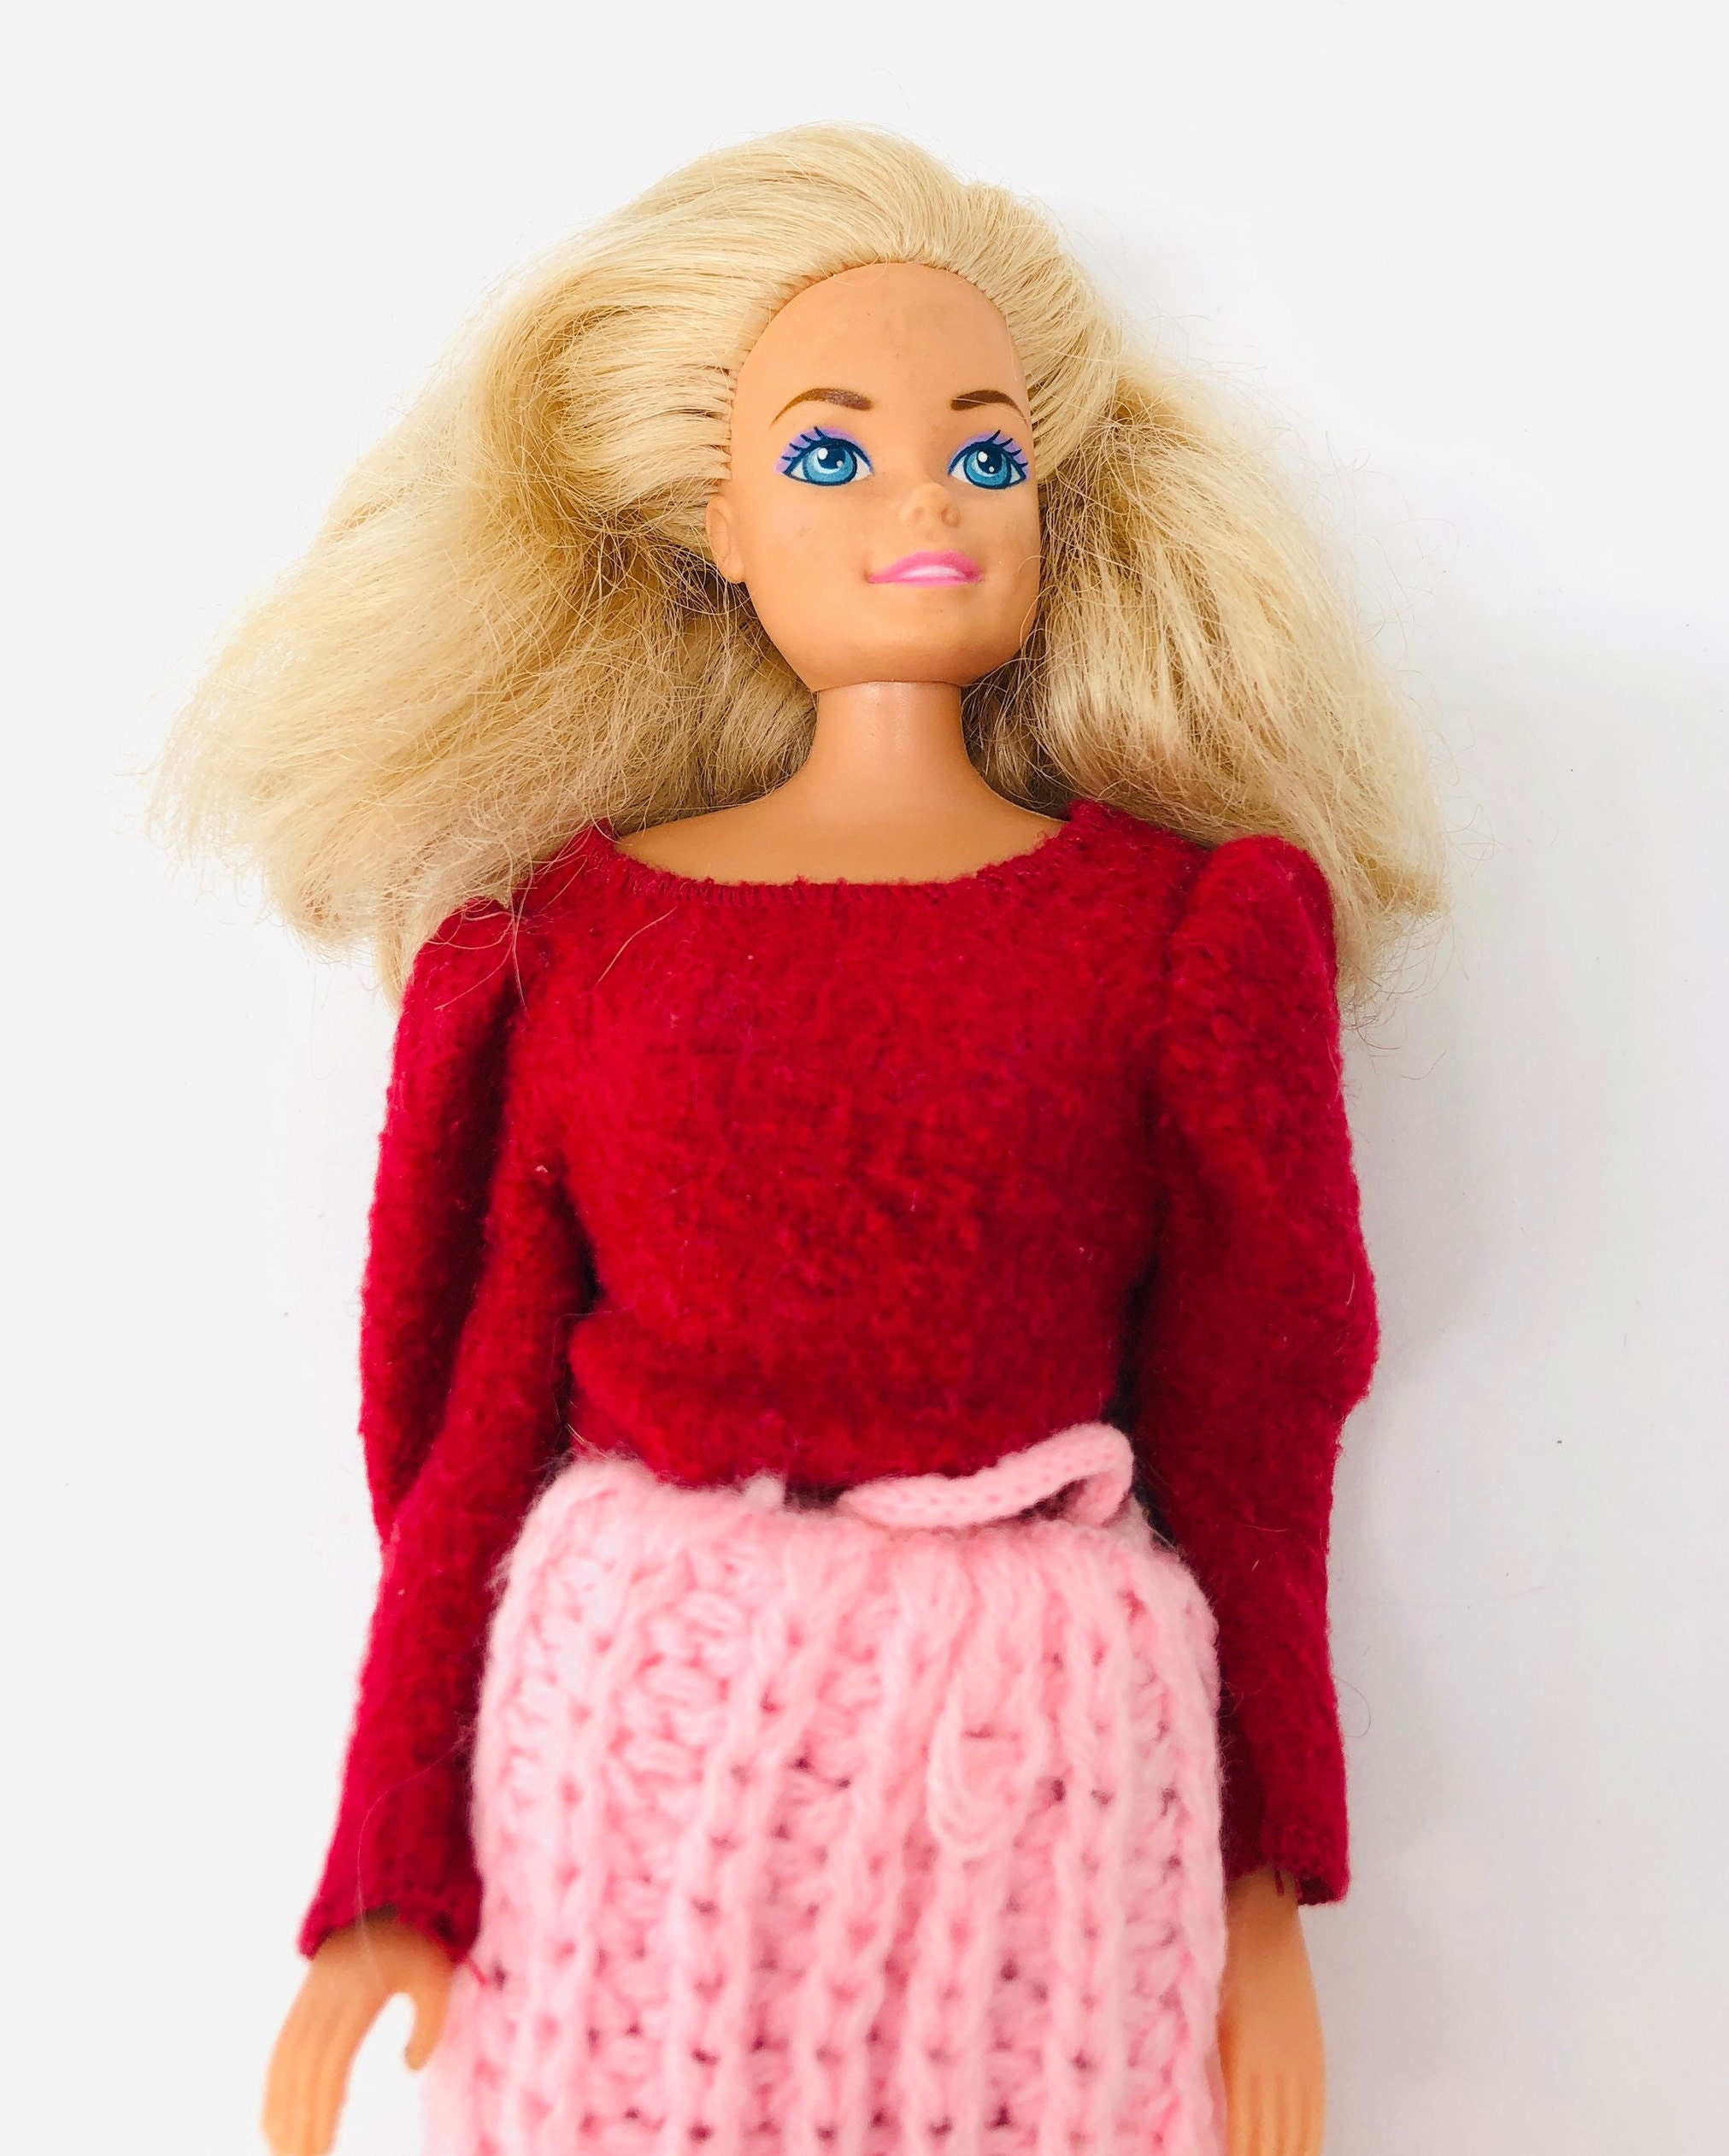 Vintage Barbies Wearing Original Outfit Sold Individually - Etsy